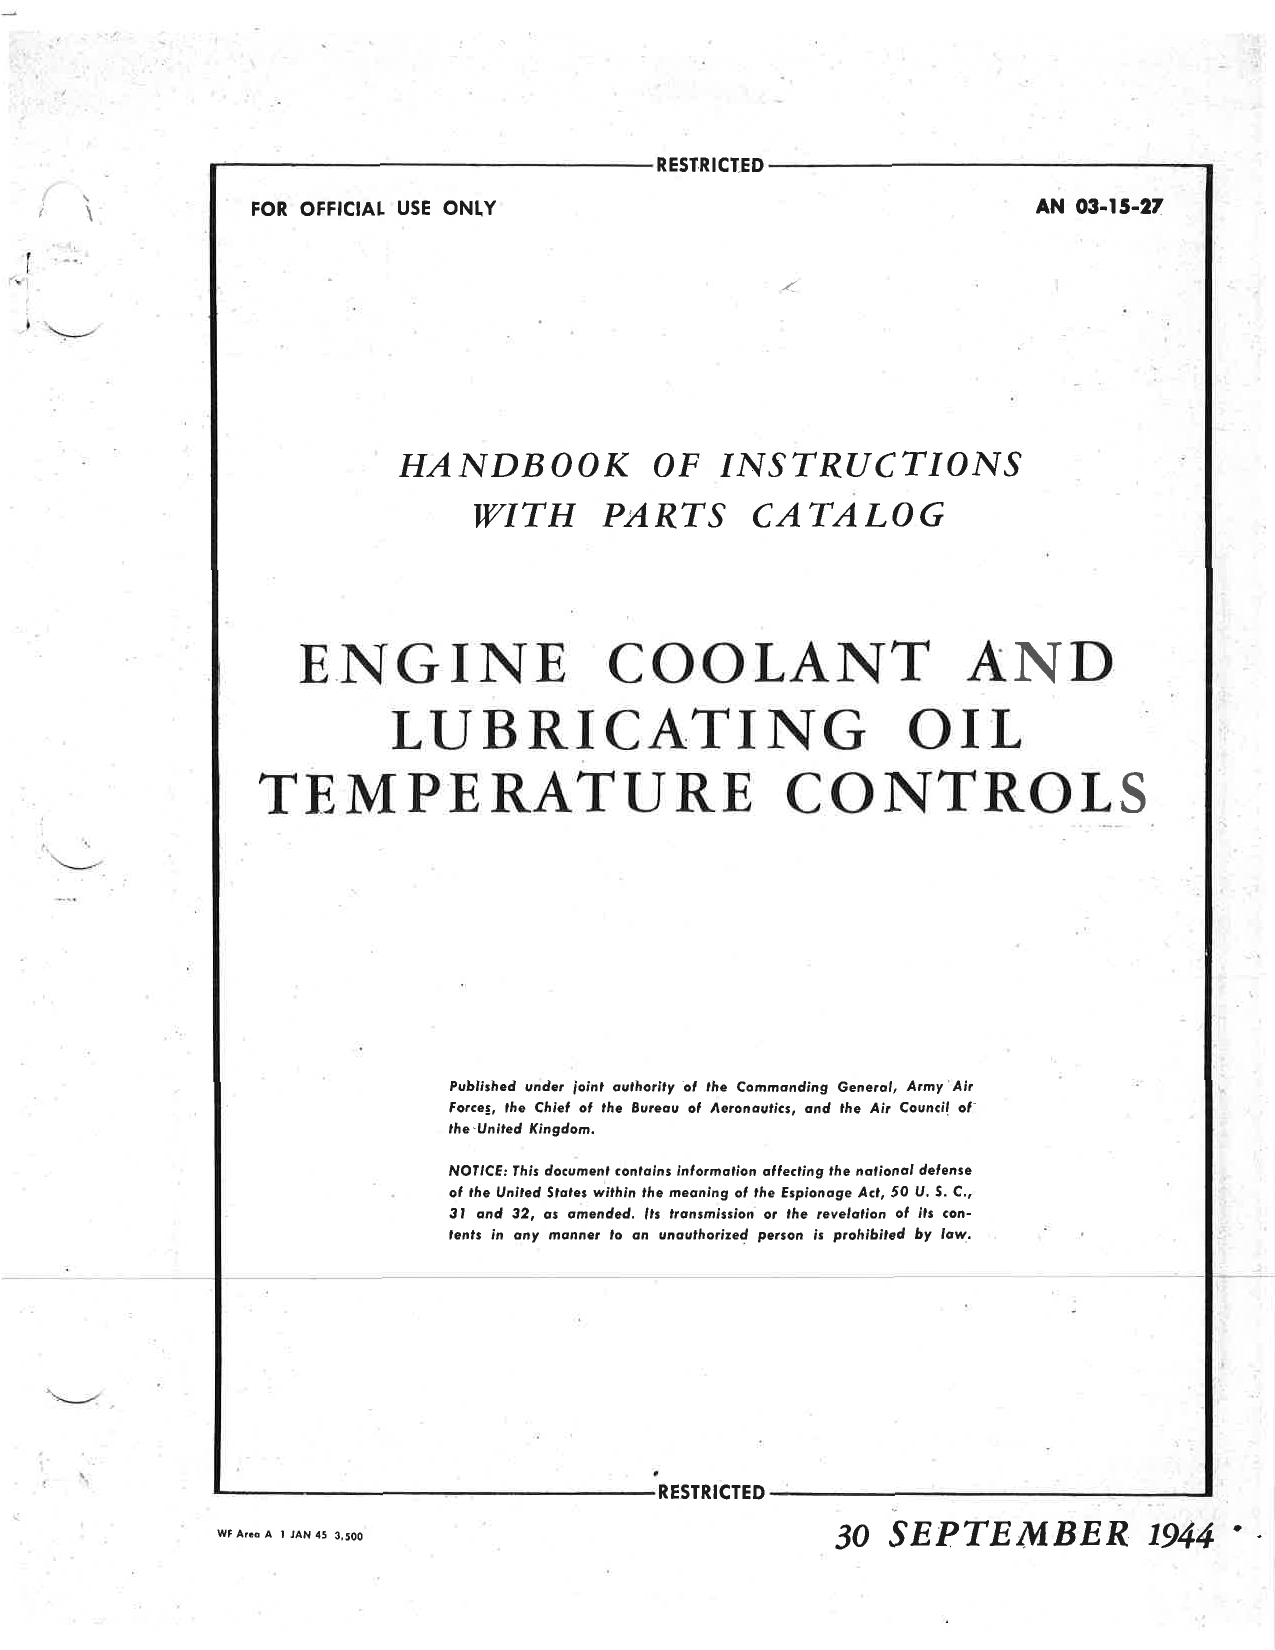 Sample page 1 from AirCorps Library document: Engine Coolant and Lubricating Oil Temperature Controls